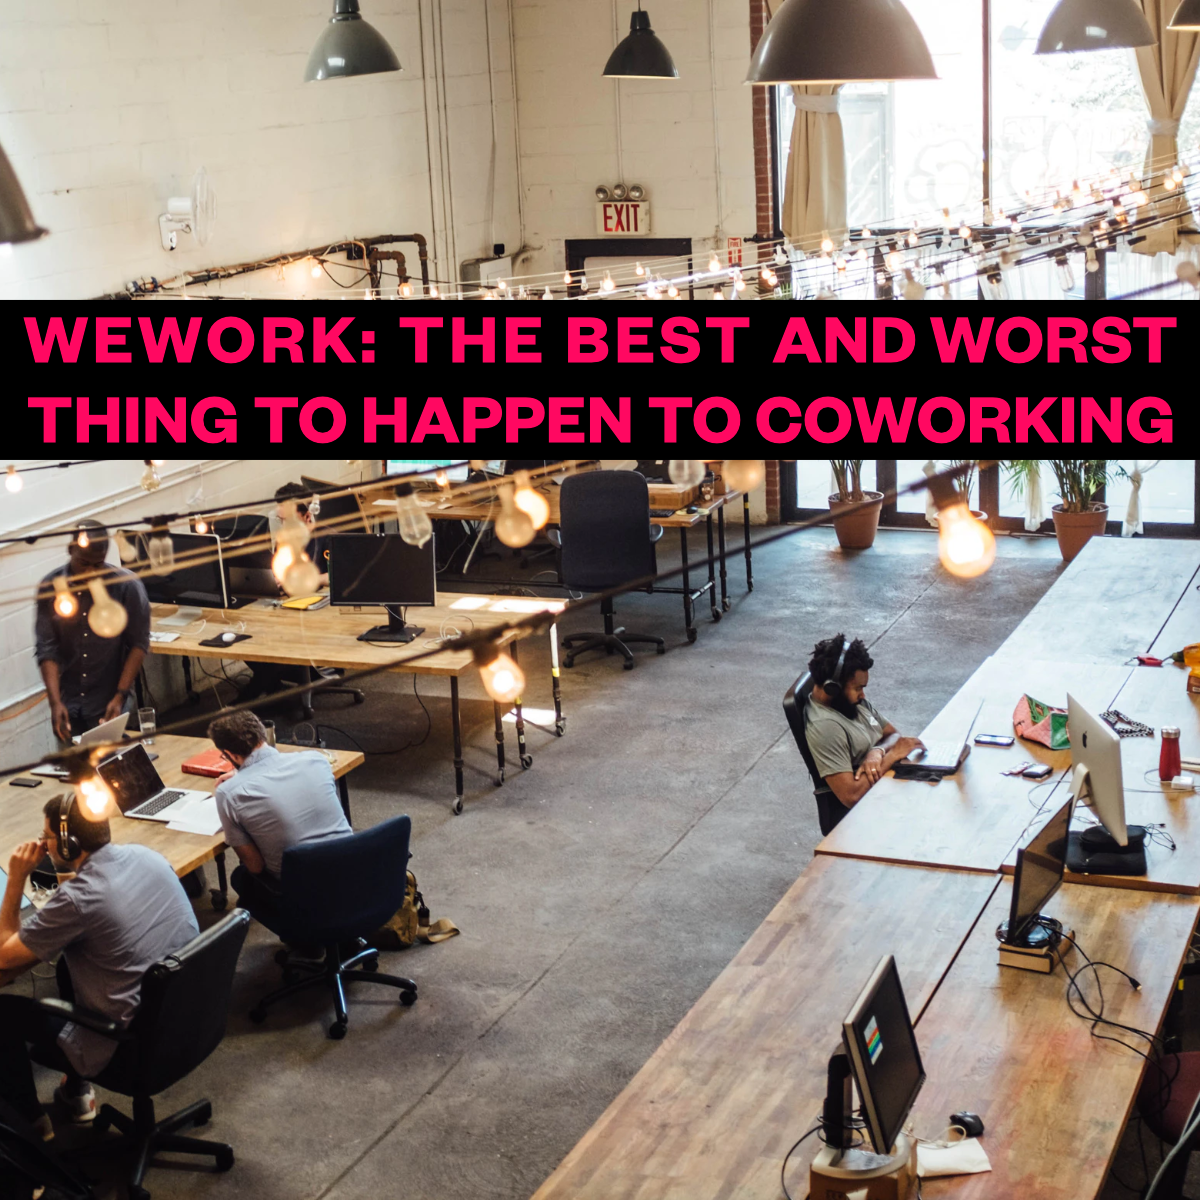 Wework Was The Best and Worst Thing to Happen to Coworking